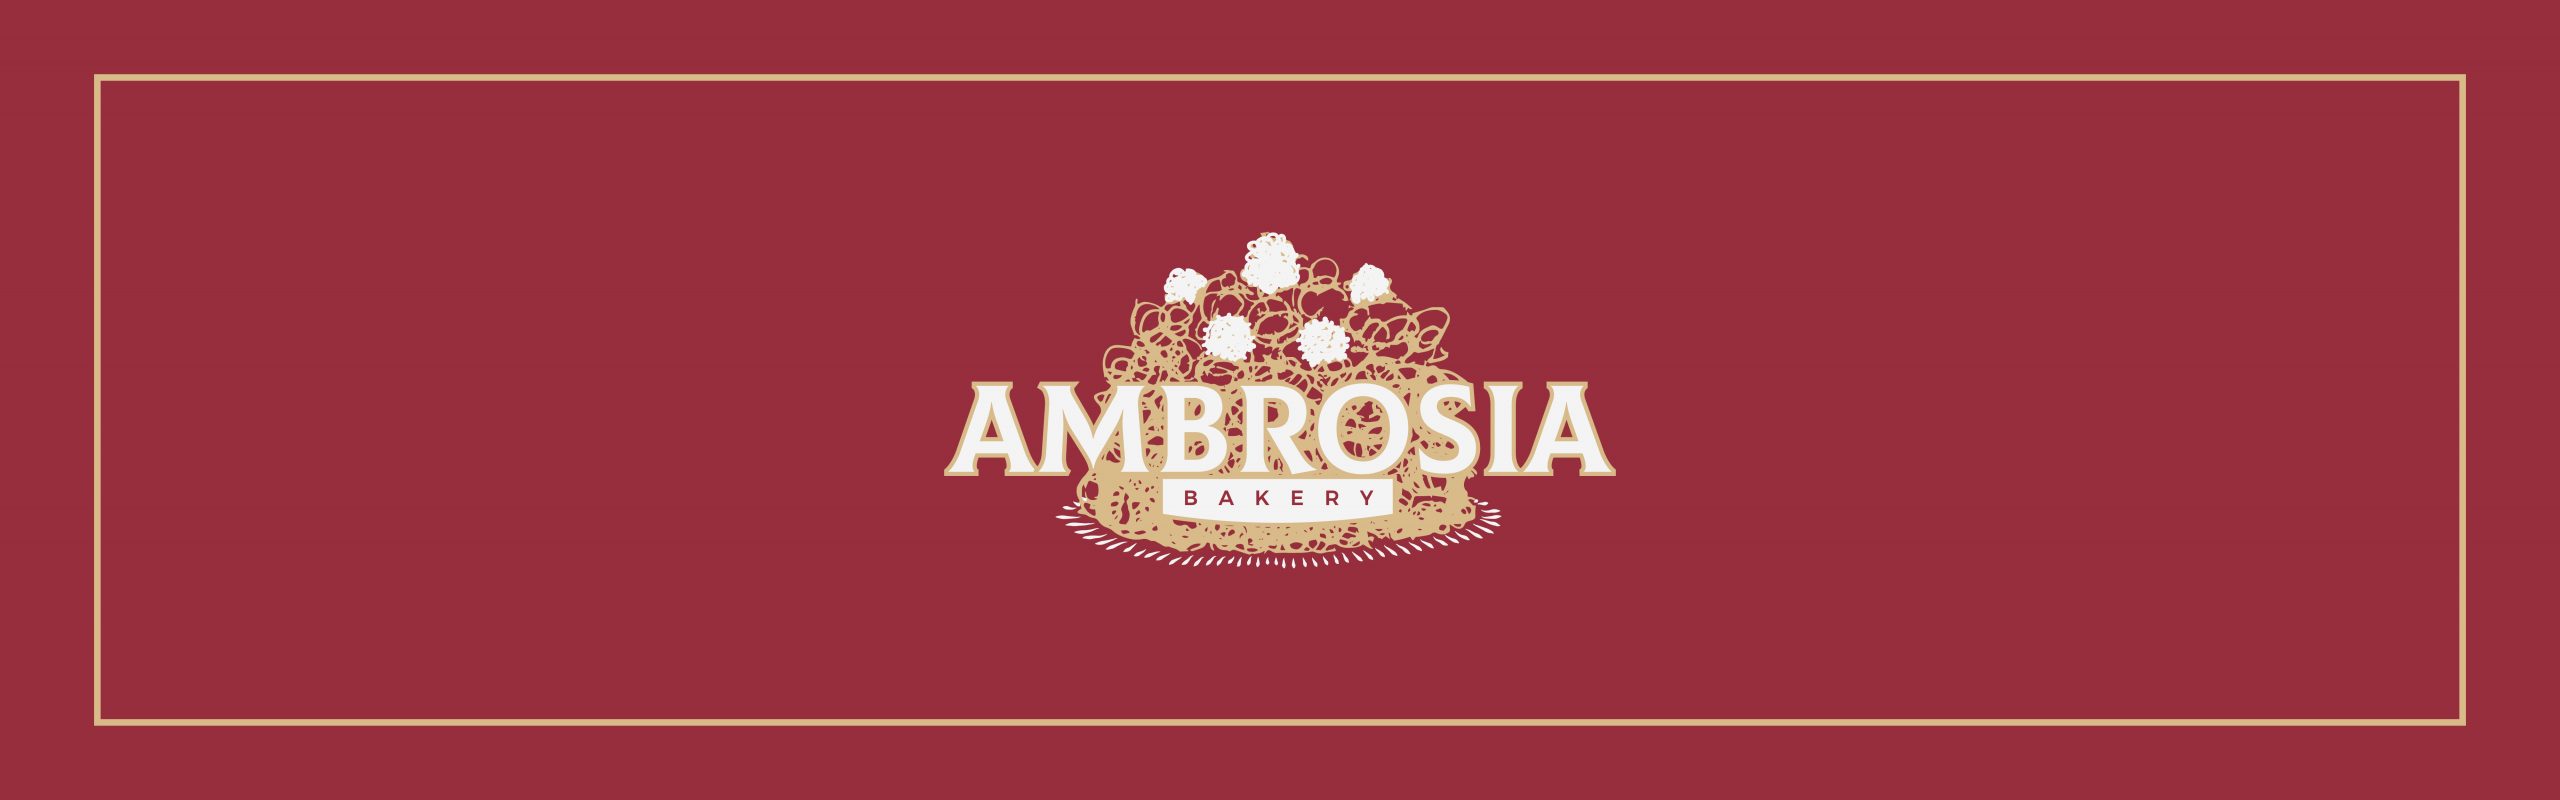 Ambrosia Bakery, Laval - Restaurant Menu, Reviews and Prices